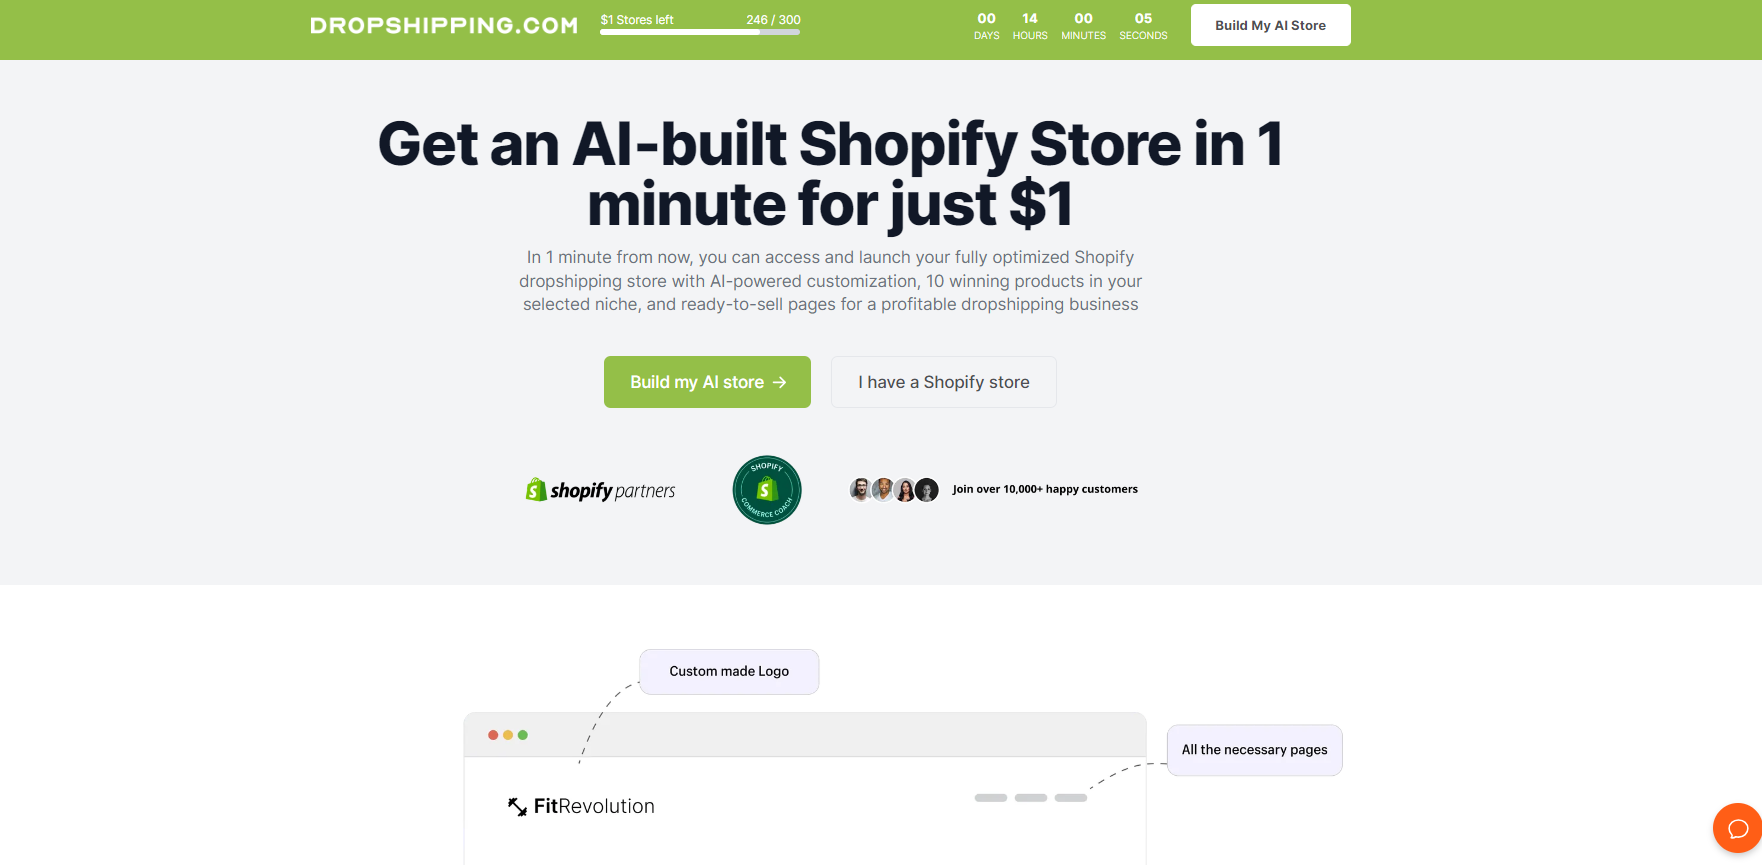 AI-generated Shopify Store service from Dropshipping.com.